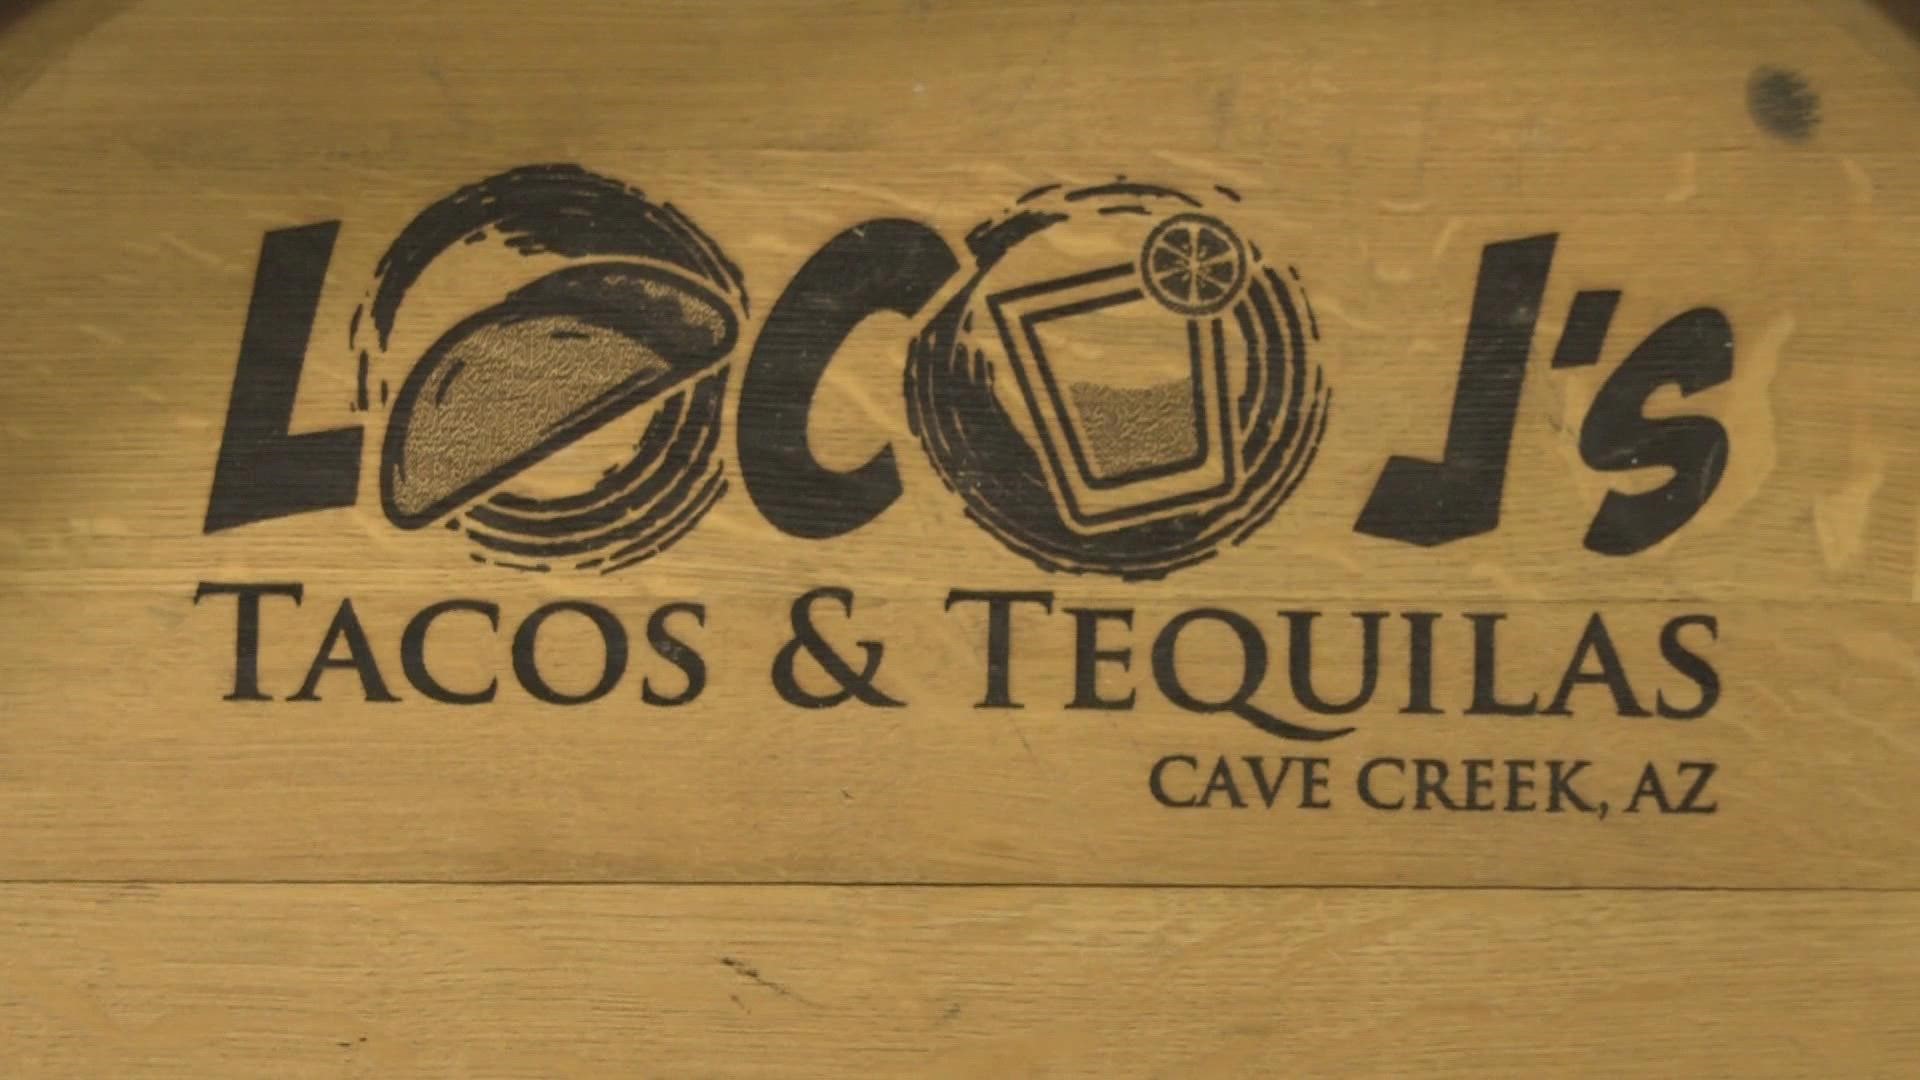 It was October 2021 when Loco J's Tacos and Tequilas were waiting on $275,000 of equipment, hoping to open in December 2021. They're now opening in a couple of weeks